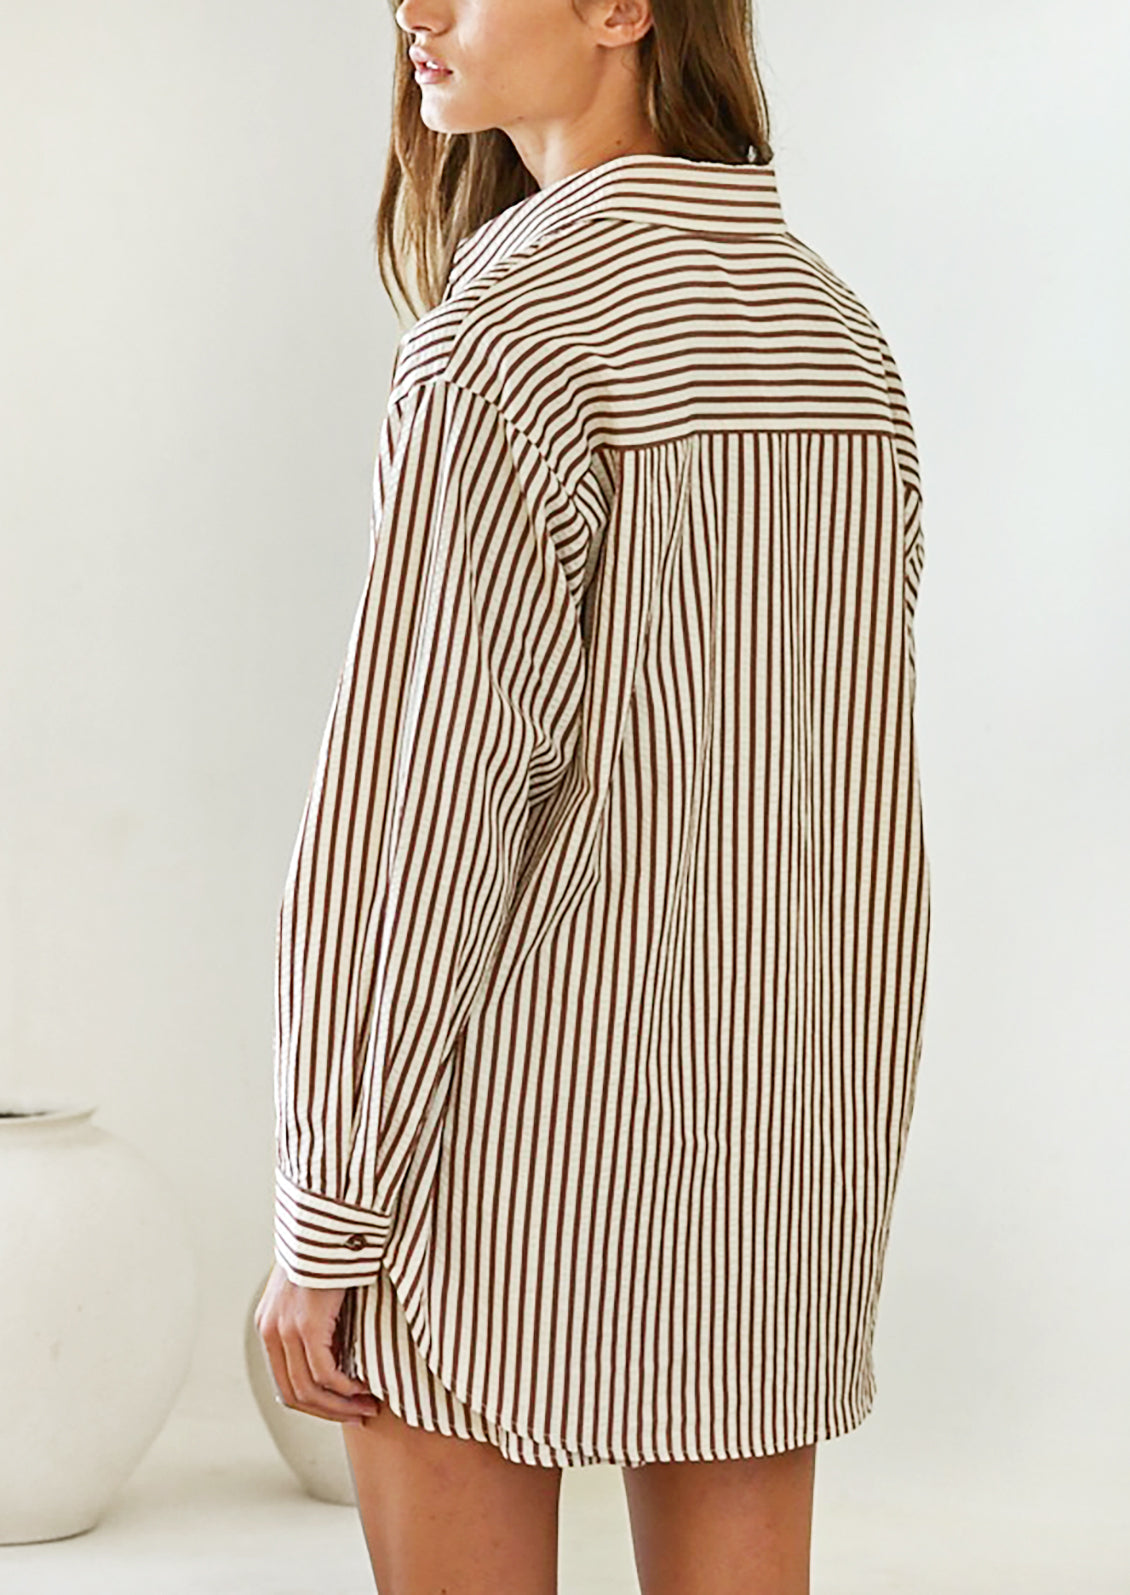 A woman wearing a long sleeve button front shirt in white with brown stripes.